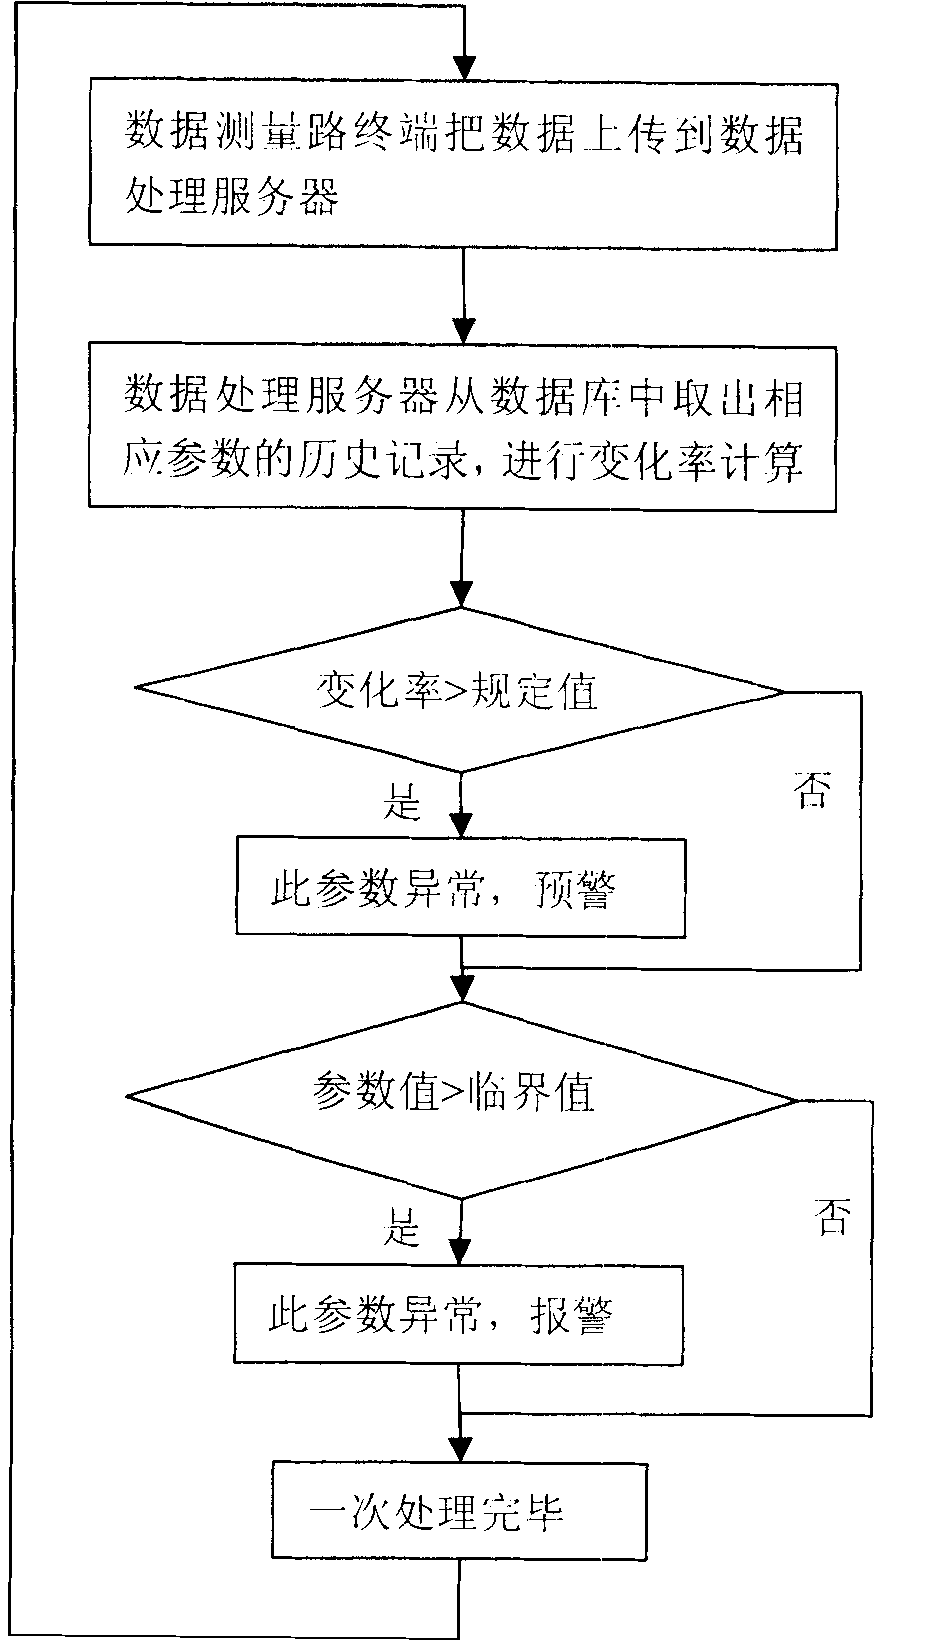 Sub-health running status recognition method of electrical device